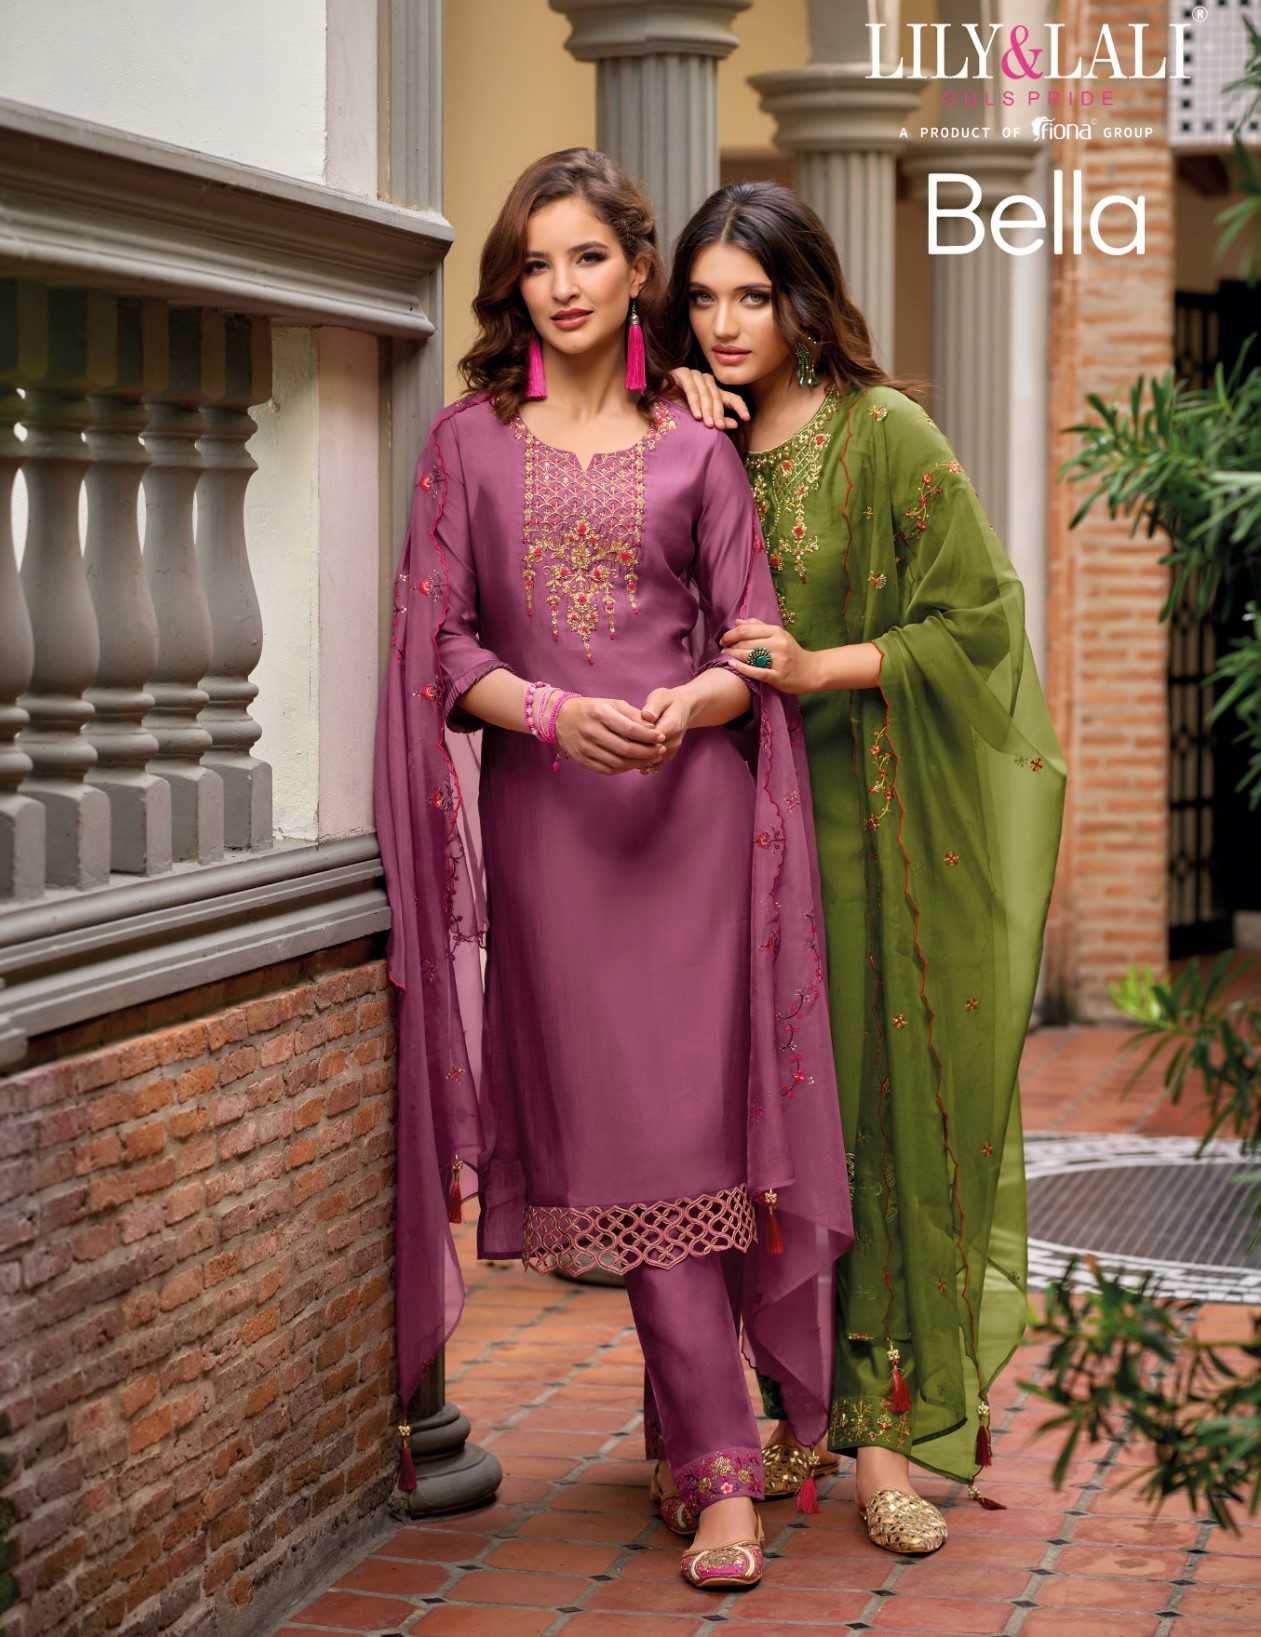 lily and lali present bella new readymade designer collection for festive wear salwar suit